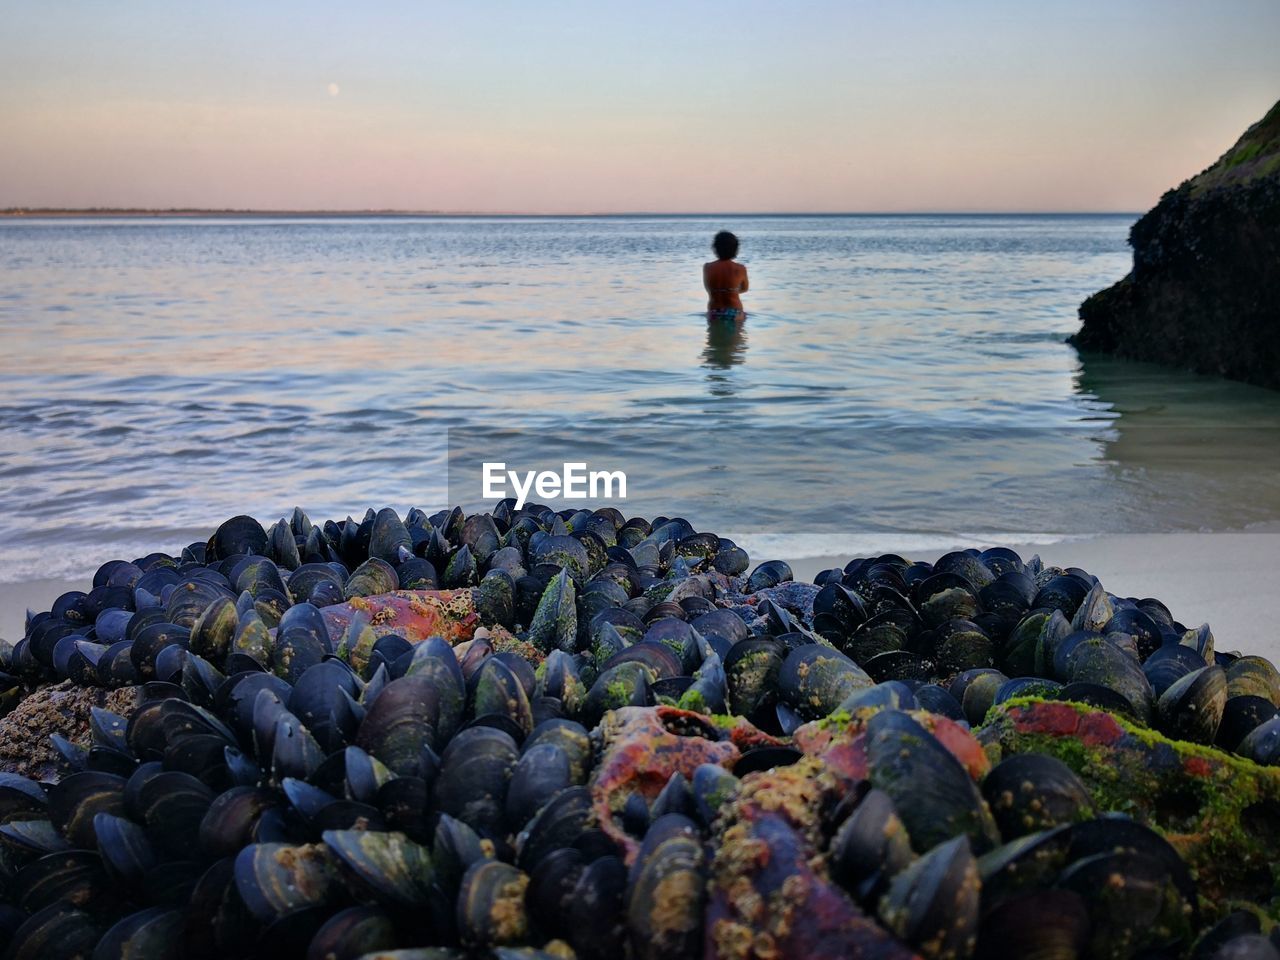 Close-up of mussels at beach against woman swimming in sea